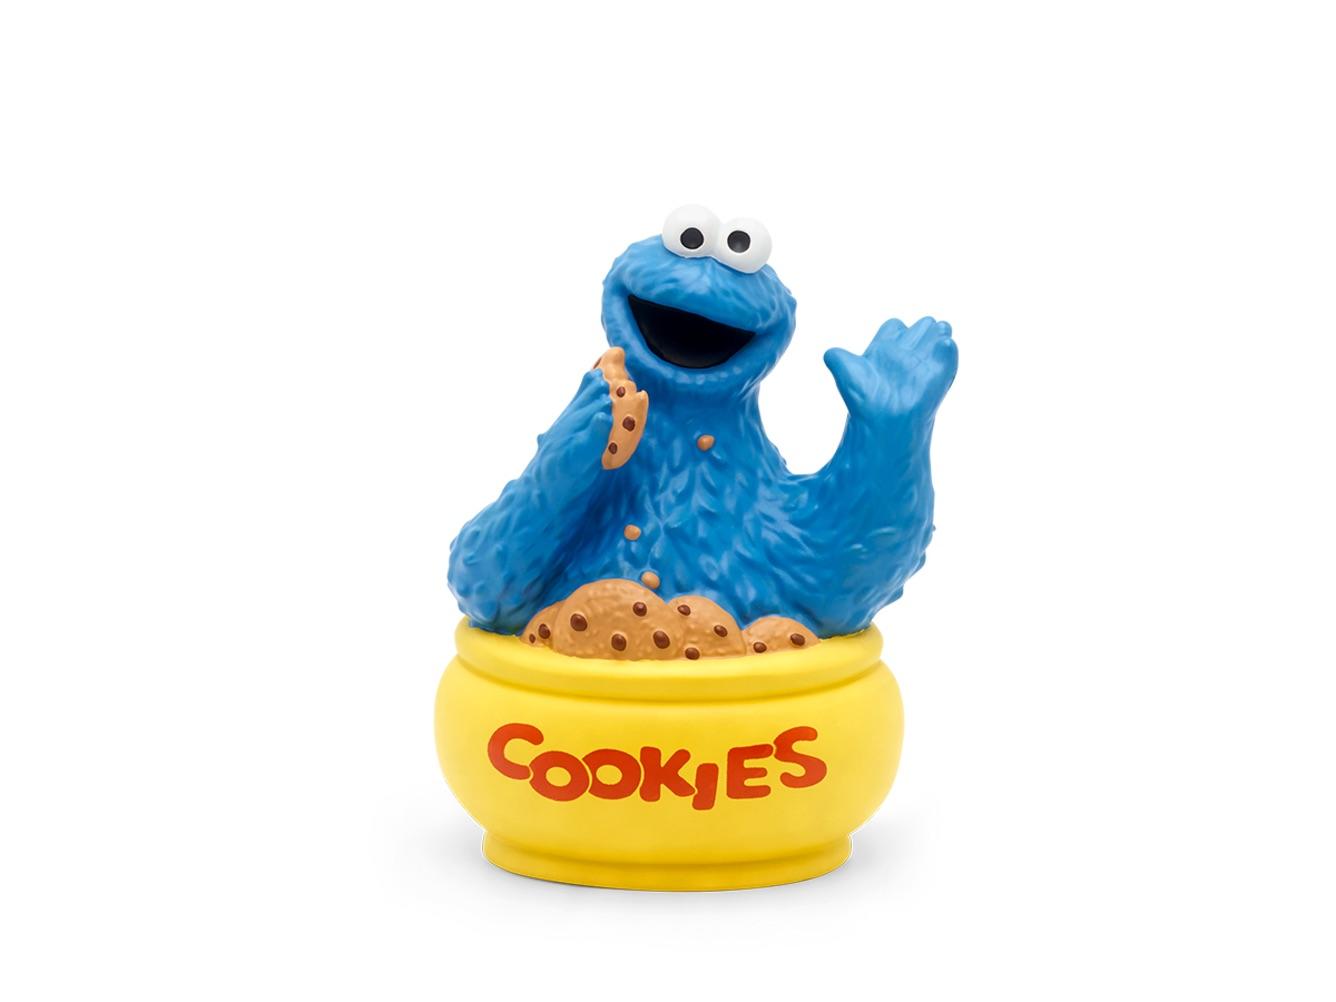 Blue Cookie Monster from Sesame Street sitting in a yellow tub.